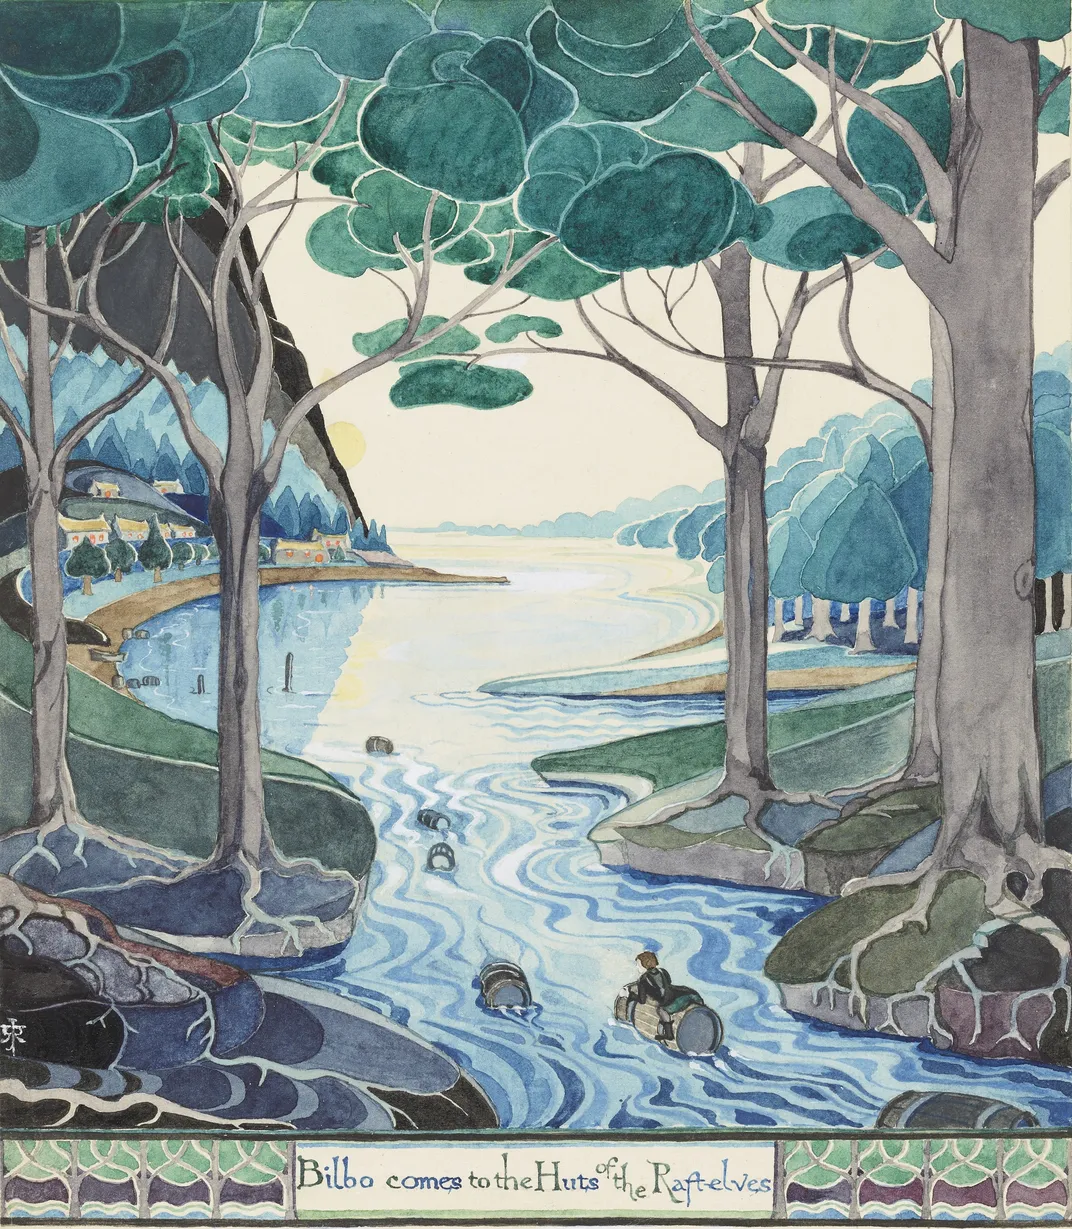 An aquatic blue-green scene of a little hobbit clinging to a tree branch, floating on a beautiful river